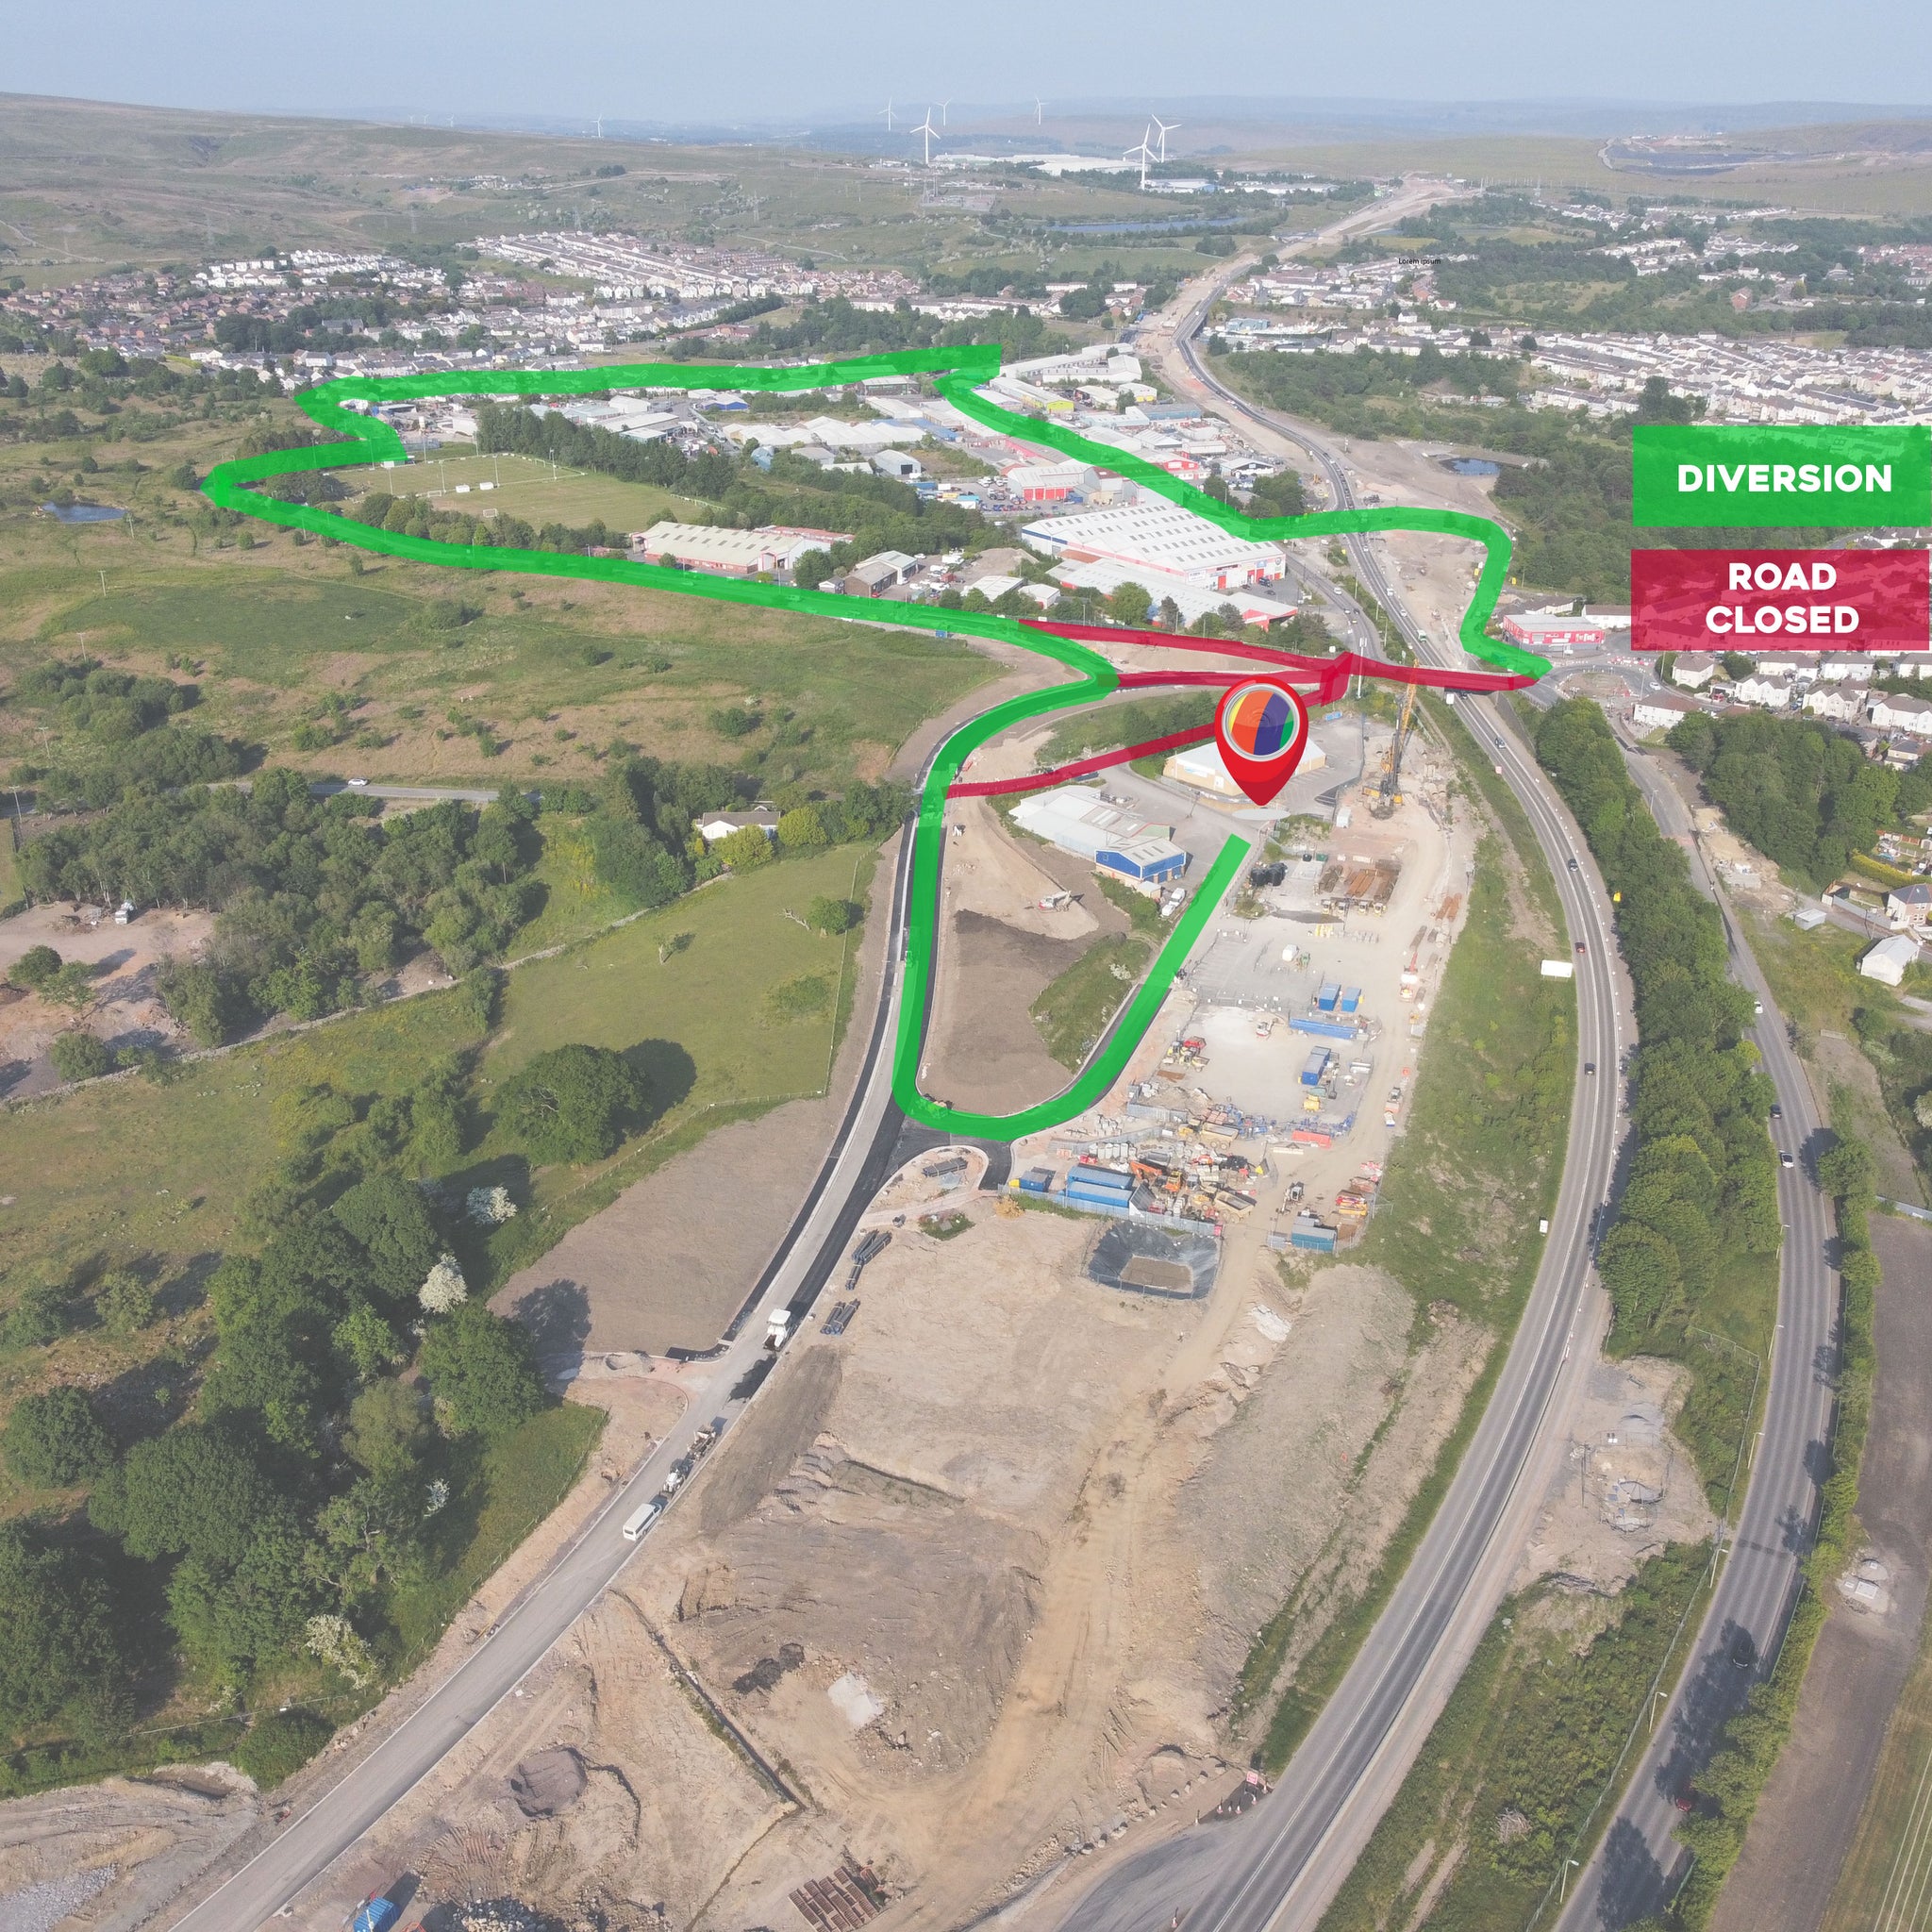 Important Access Updates - Rabart Merthyr Tydfil: Reopening of Rocky Road and Temporary Closures